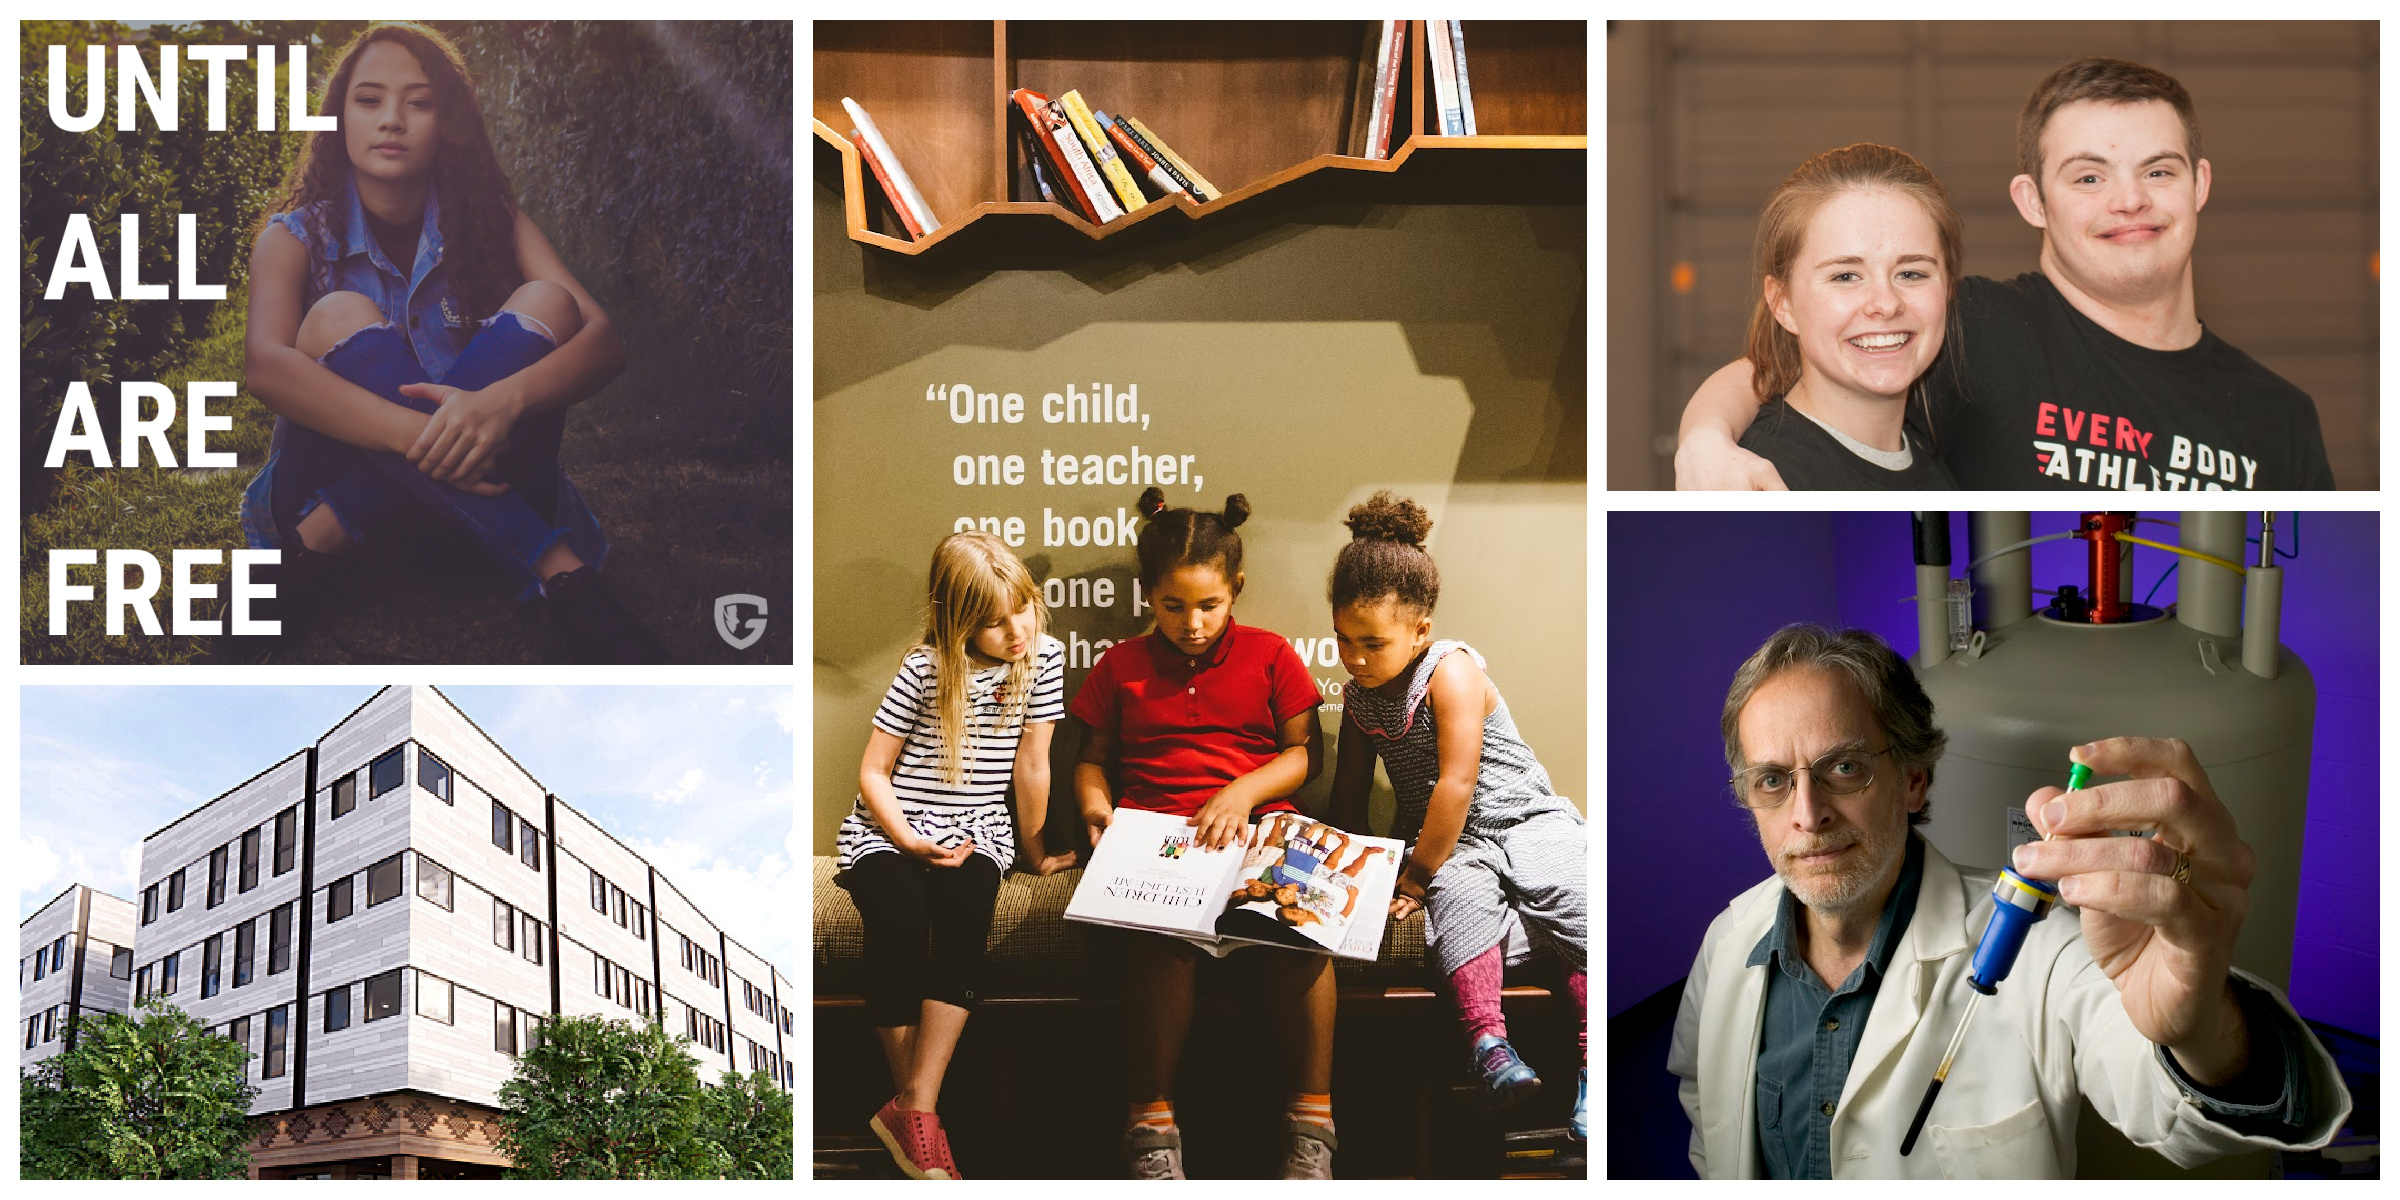 Image 1: a young girl sits cross-legged on grass, behind a text overlay that says "Until All Are Free." Image 2: an outdoor photo of the corner of a white building. Image 3: Three children sit on a bench reading a book together. Image 4: a young woman smiles next to a young man wearing a black shirt that says "Every Body Athletics." Image 5: A man wearing a white lab coat holds up a syringe for the camera. 